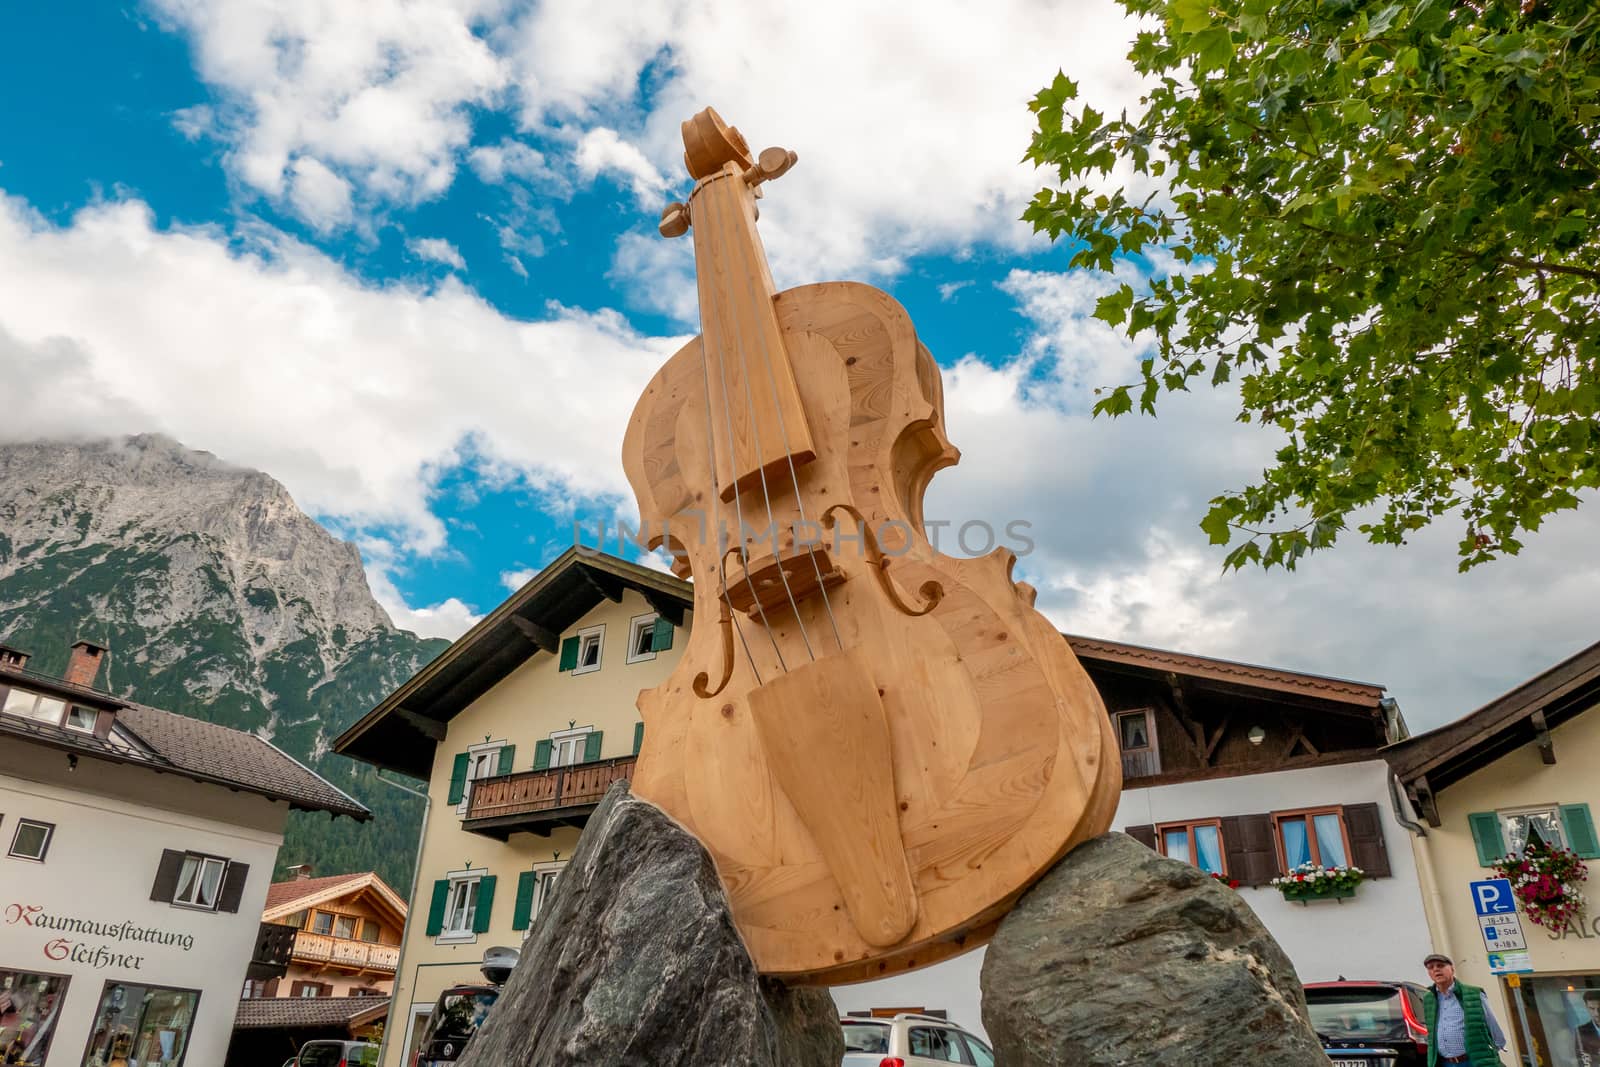 Mittenwald, Bavaria/Germany - 15.08.2020: A huge wooden violin with sides, body and fingerboard, built diagonally on two rocks and located in the middle of Mittenwald in Bavaria